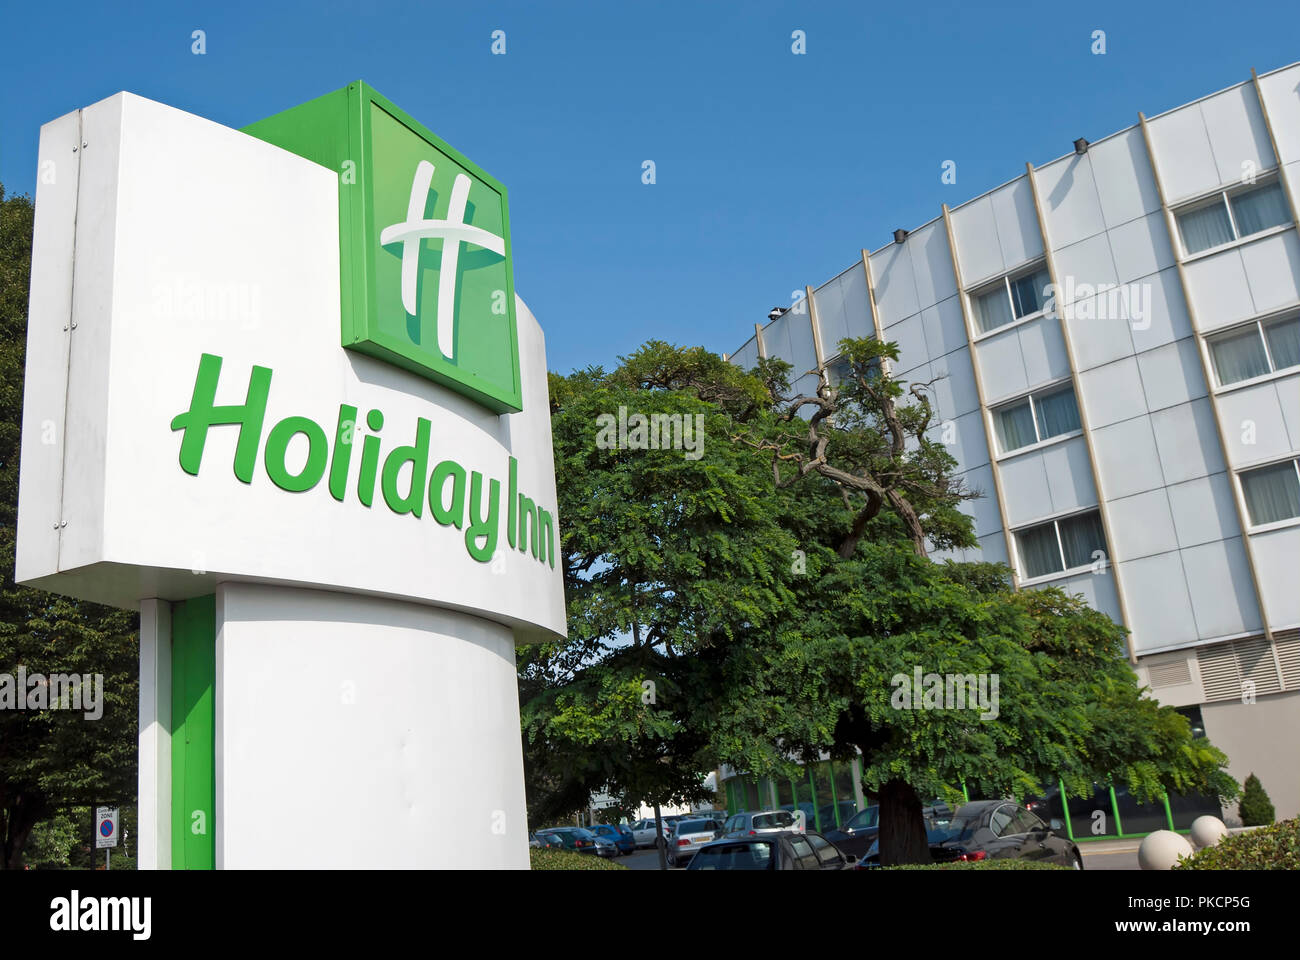 exterior with name and logo of a holiday inn hotel near heathrow airport, london, england Stock Photo